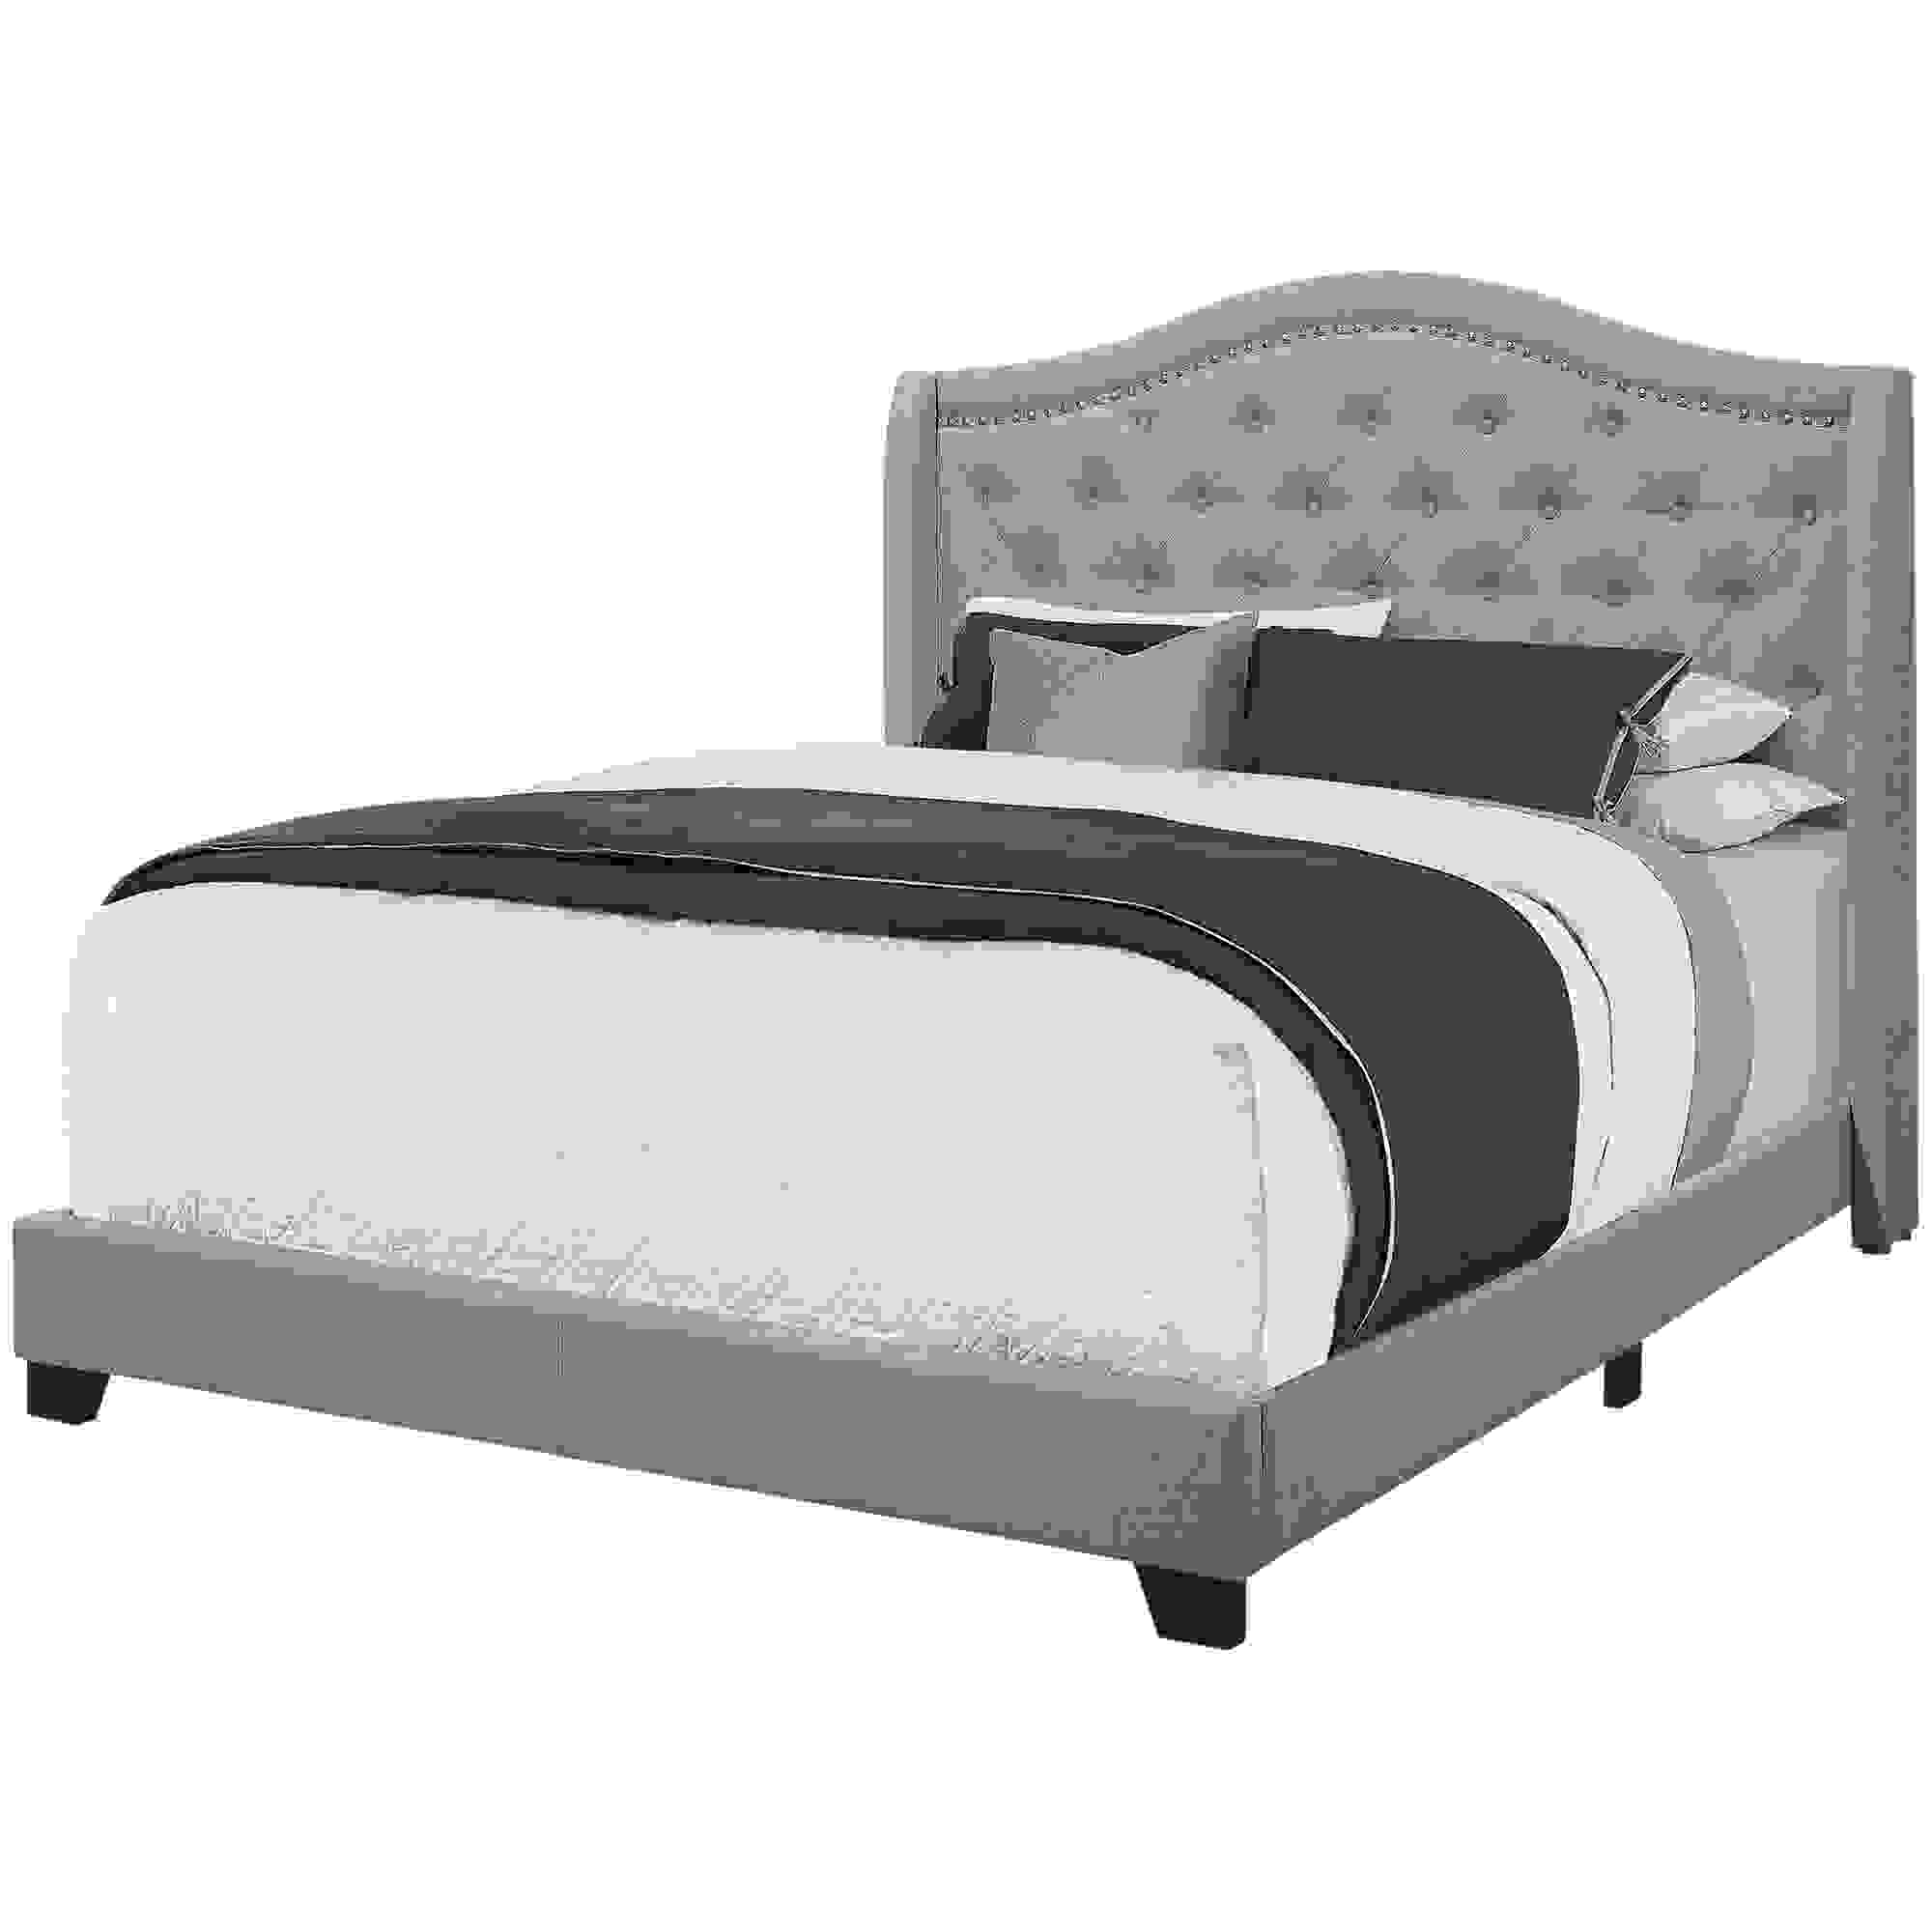 BED - QUEEN SIZE / CONTEMPORARY GREY LINEN WITH CHROME TRIM